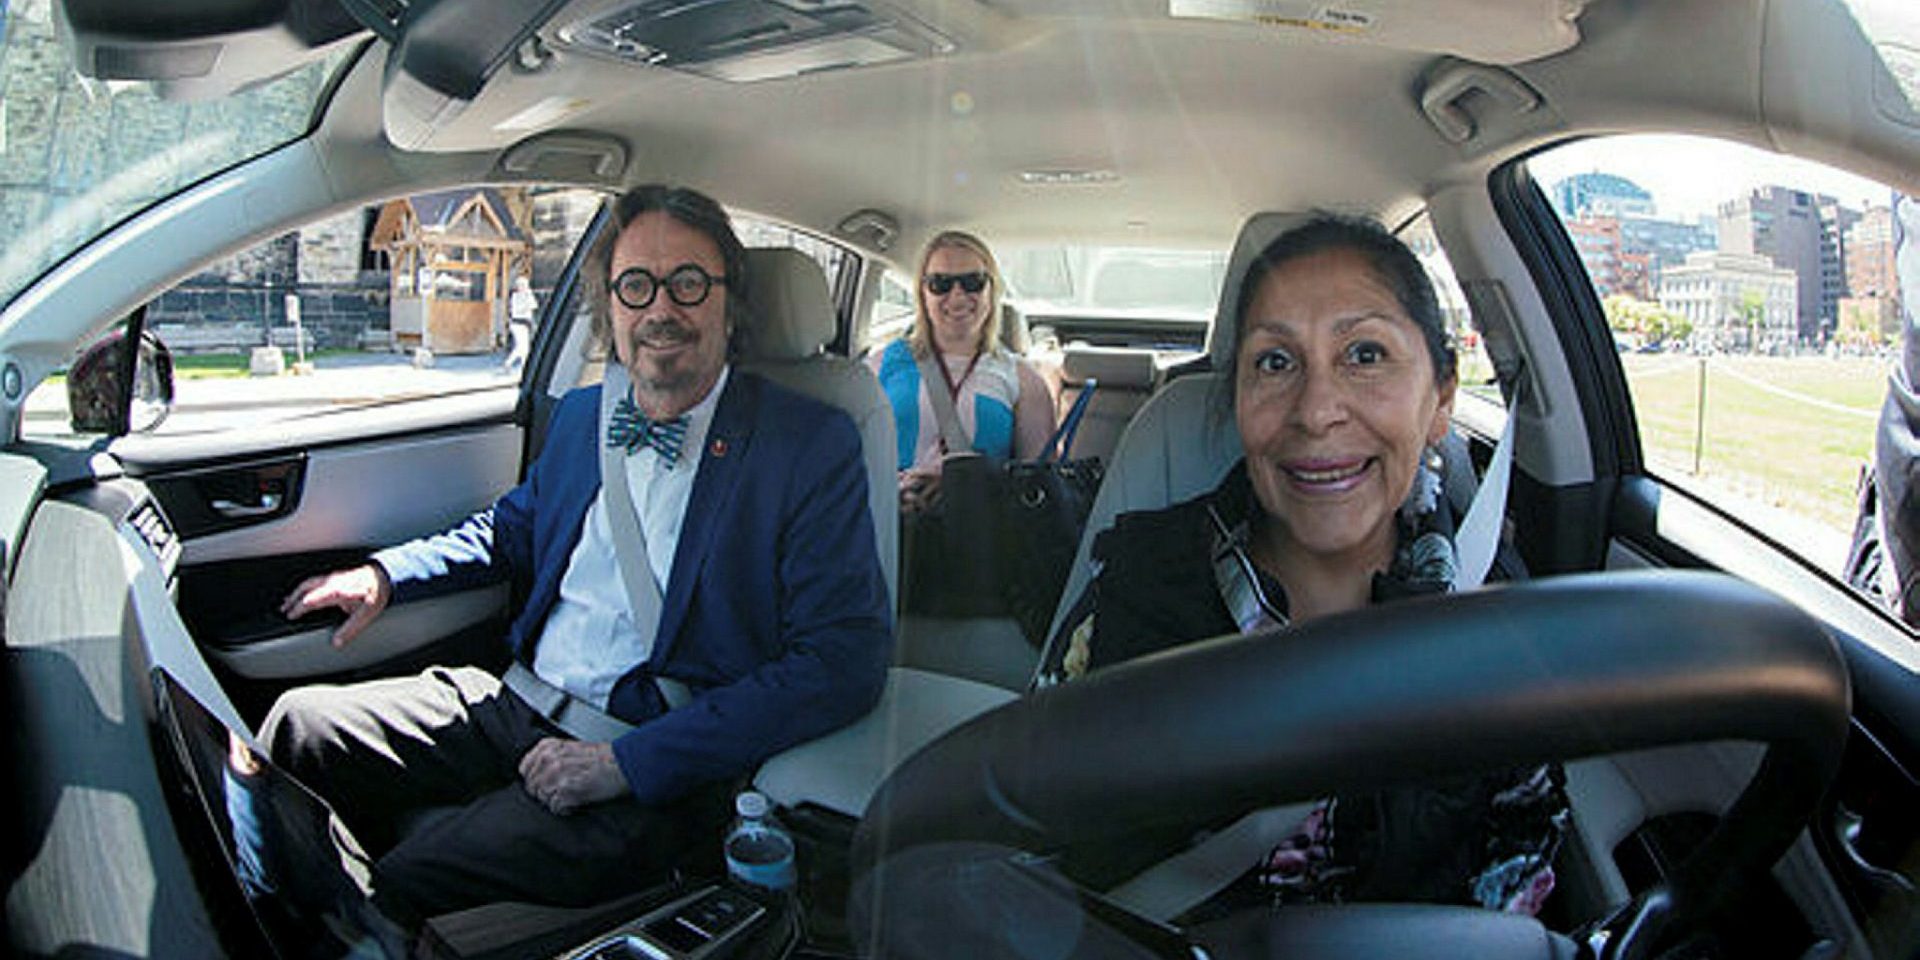 Quebec Senators Dennis Dawson and Rosa Galvez, pictured on June 7, 2017, testing out an electric car that uses hydrogen power cells to drive.